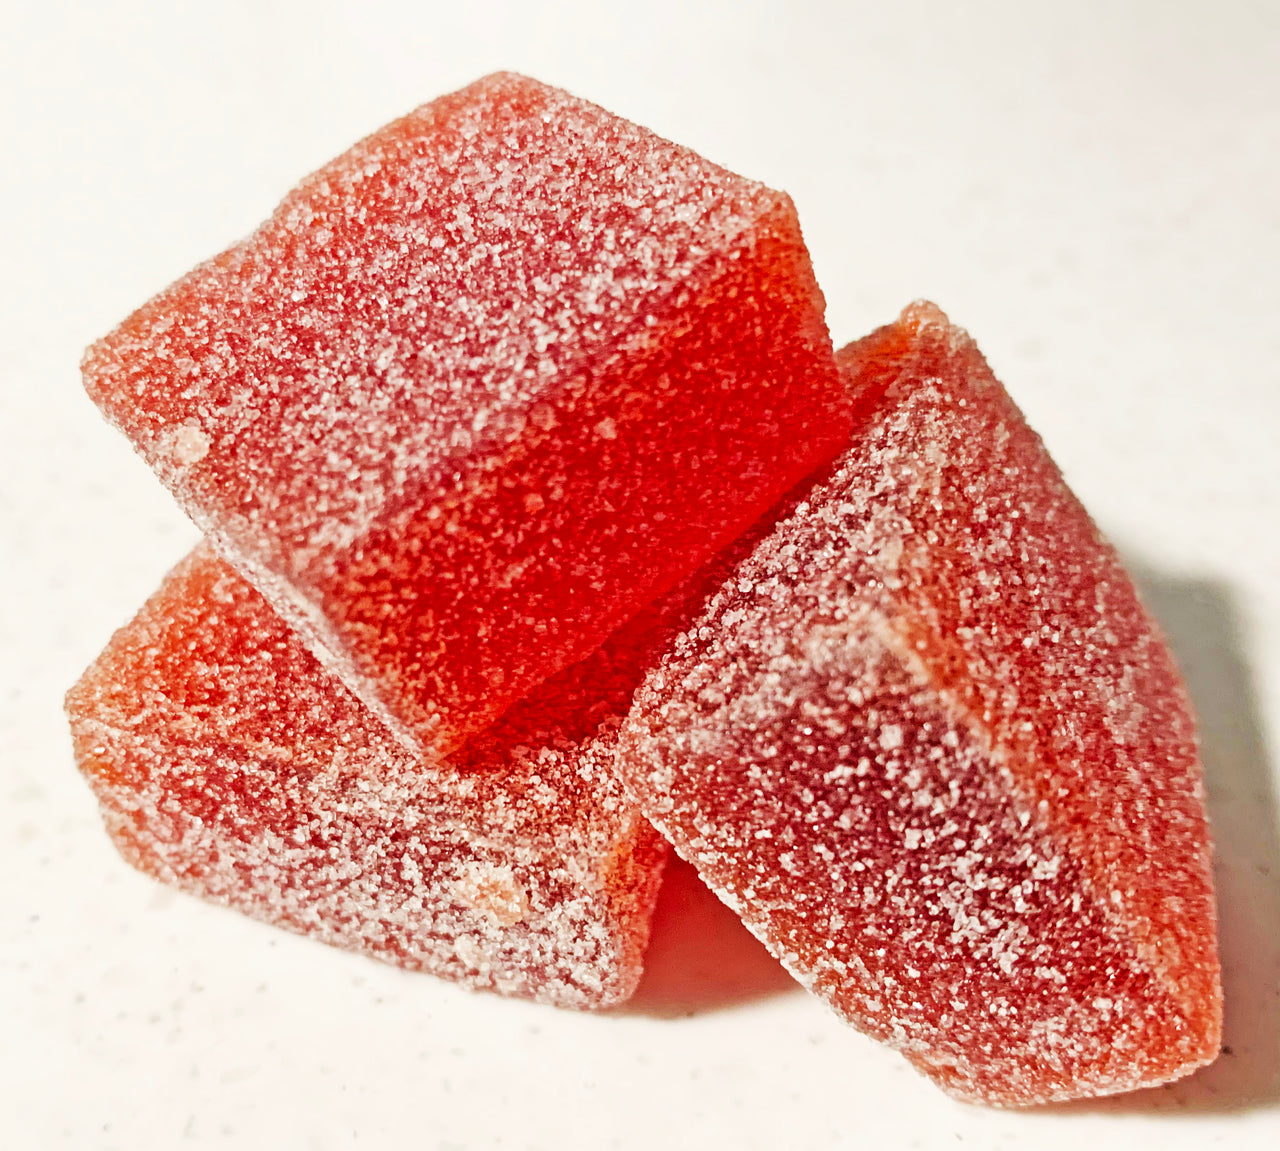 DesertUSA SOUR Prickly Pear Chewy Candy - Made from Natural Cactus Fruit